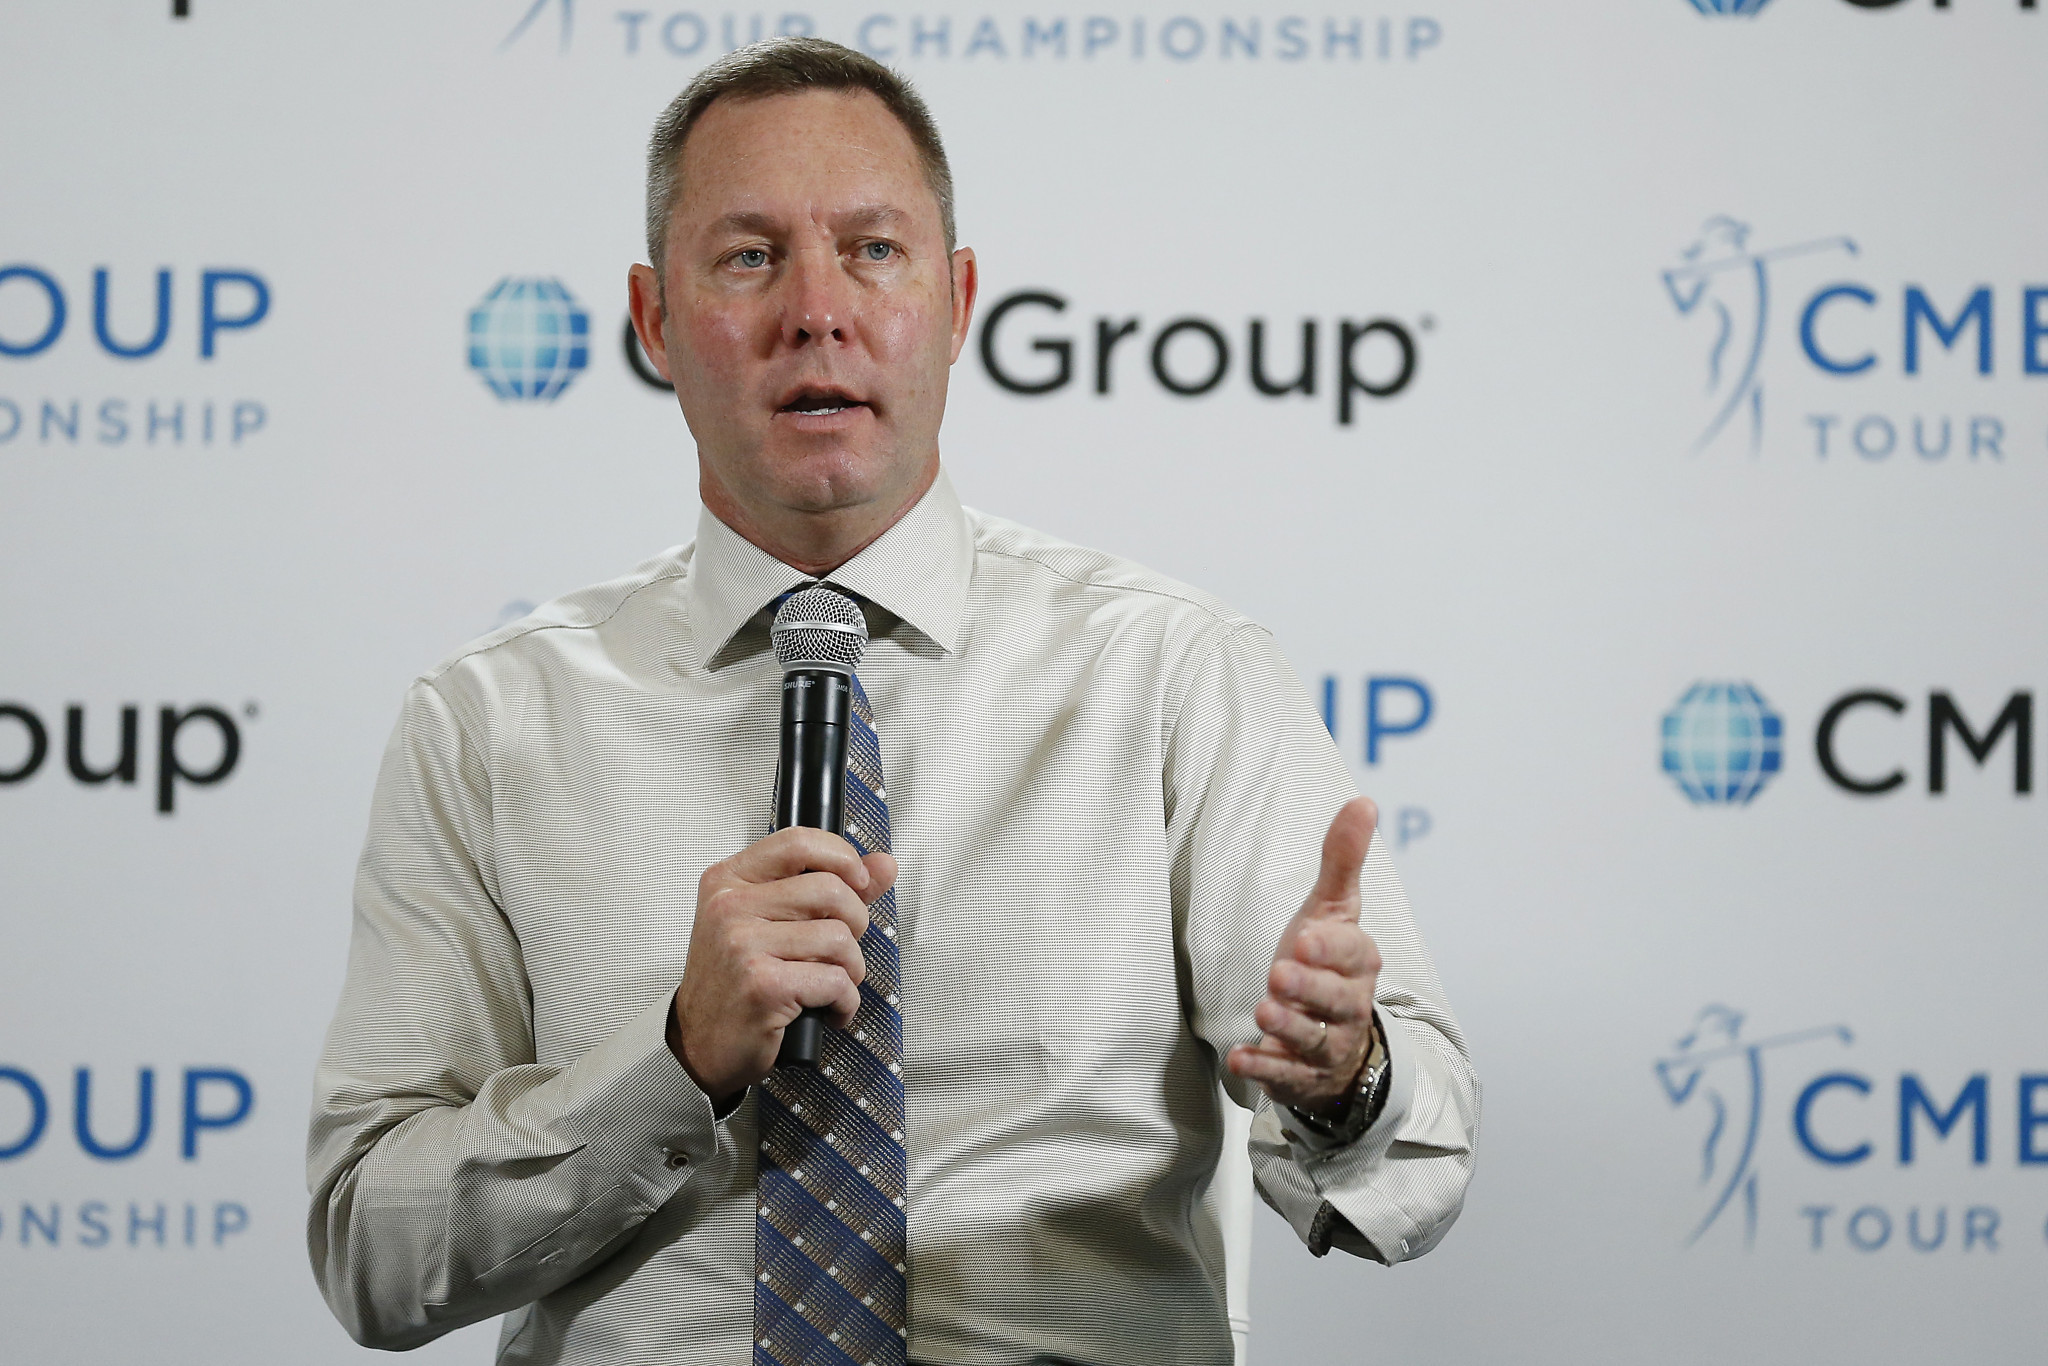 LPGA commissioner Whan to step down in 2021 after 11 years in role